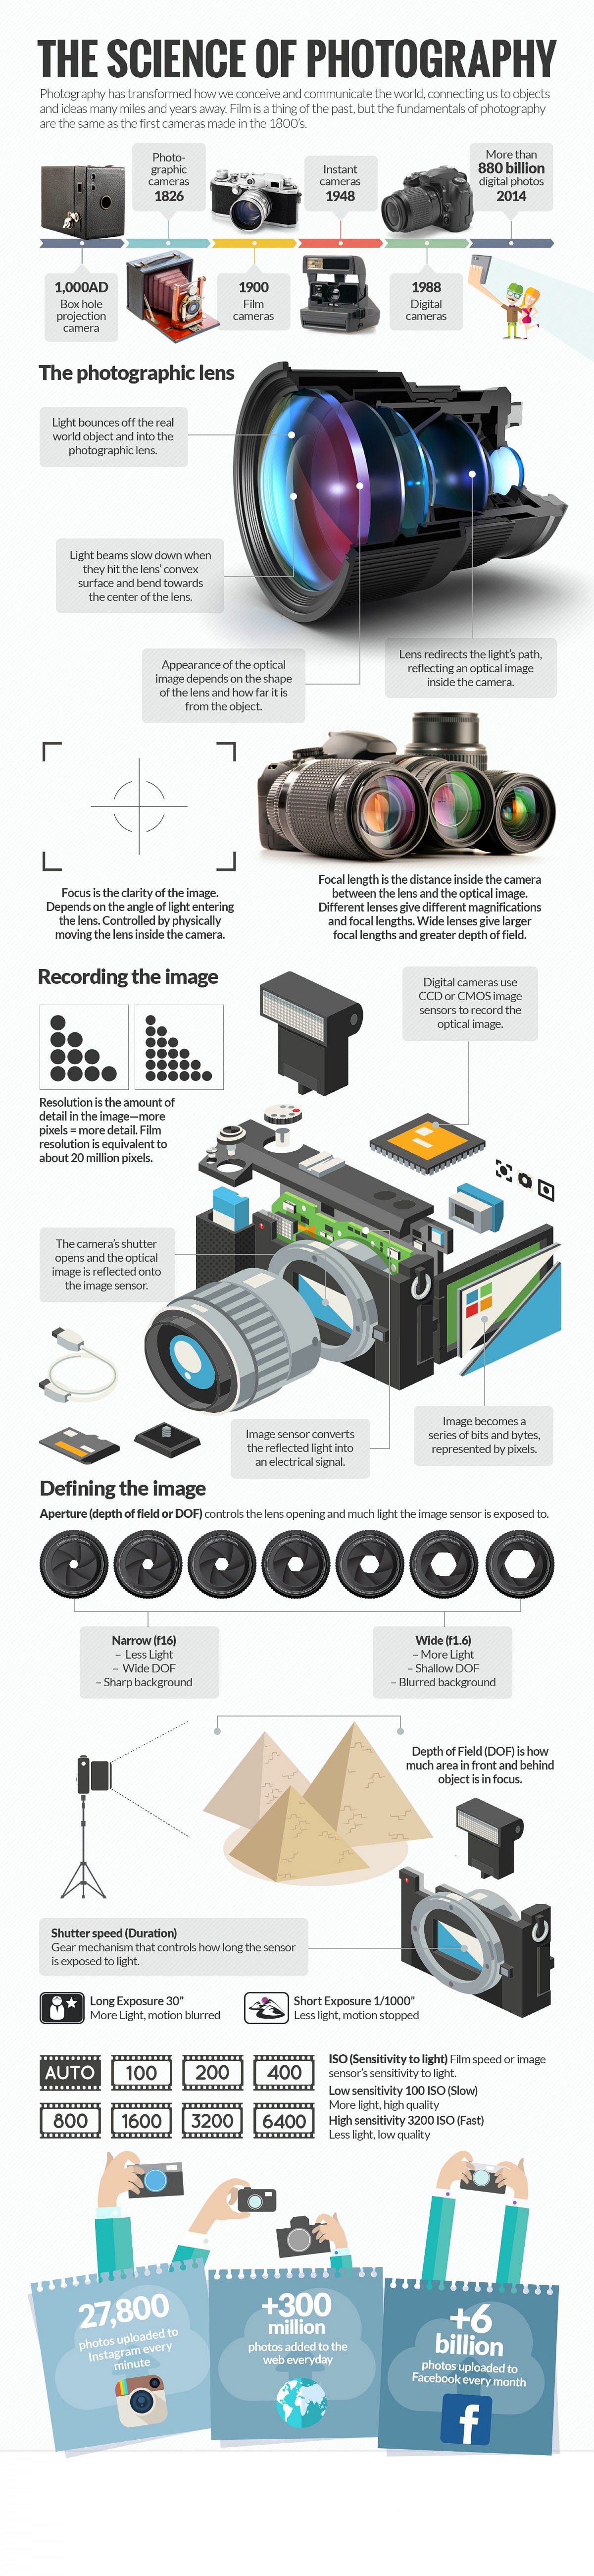 How photography actually works